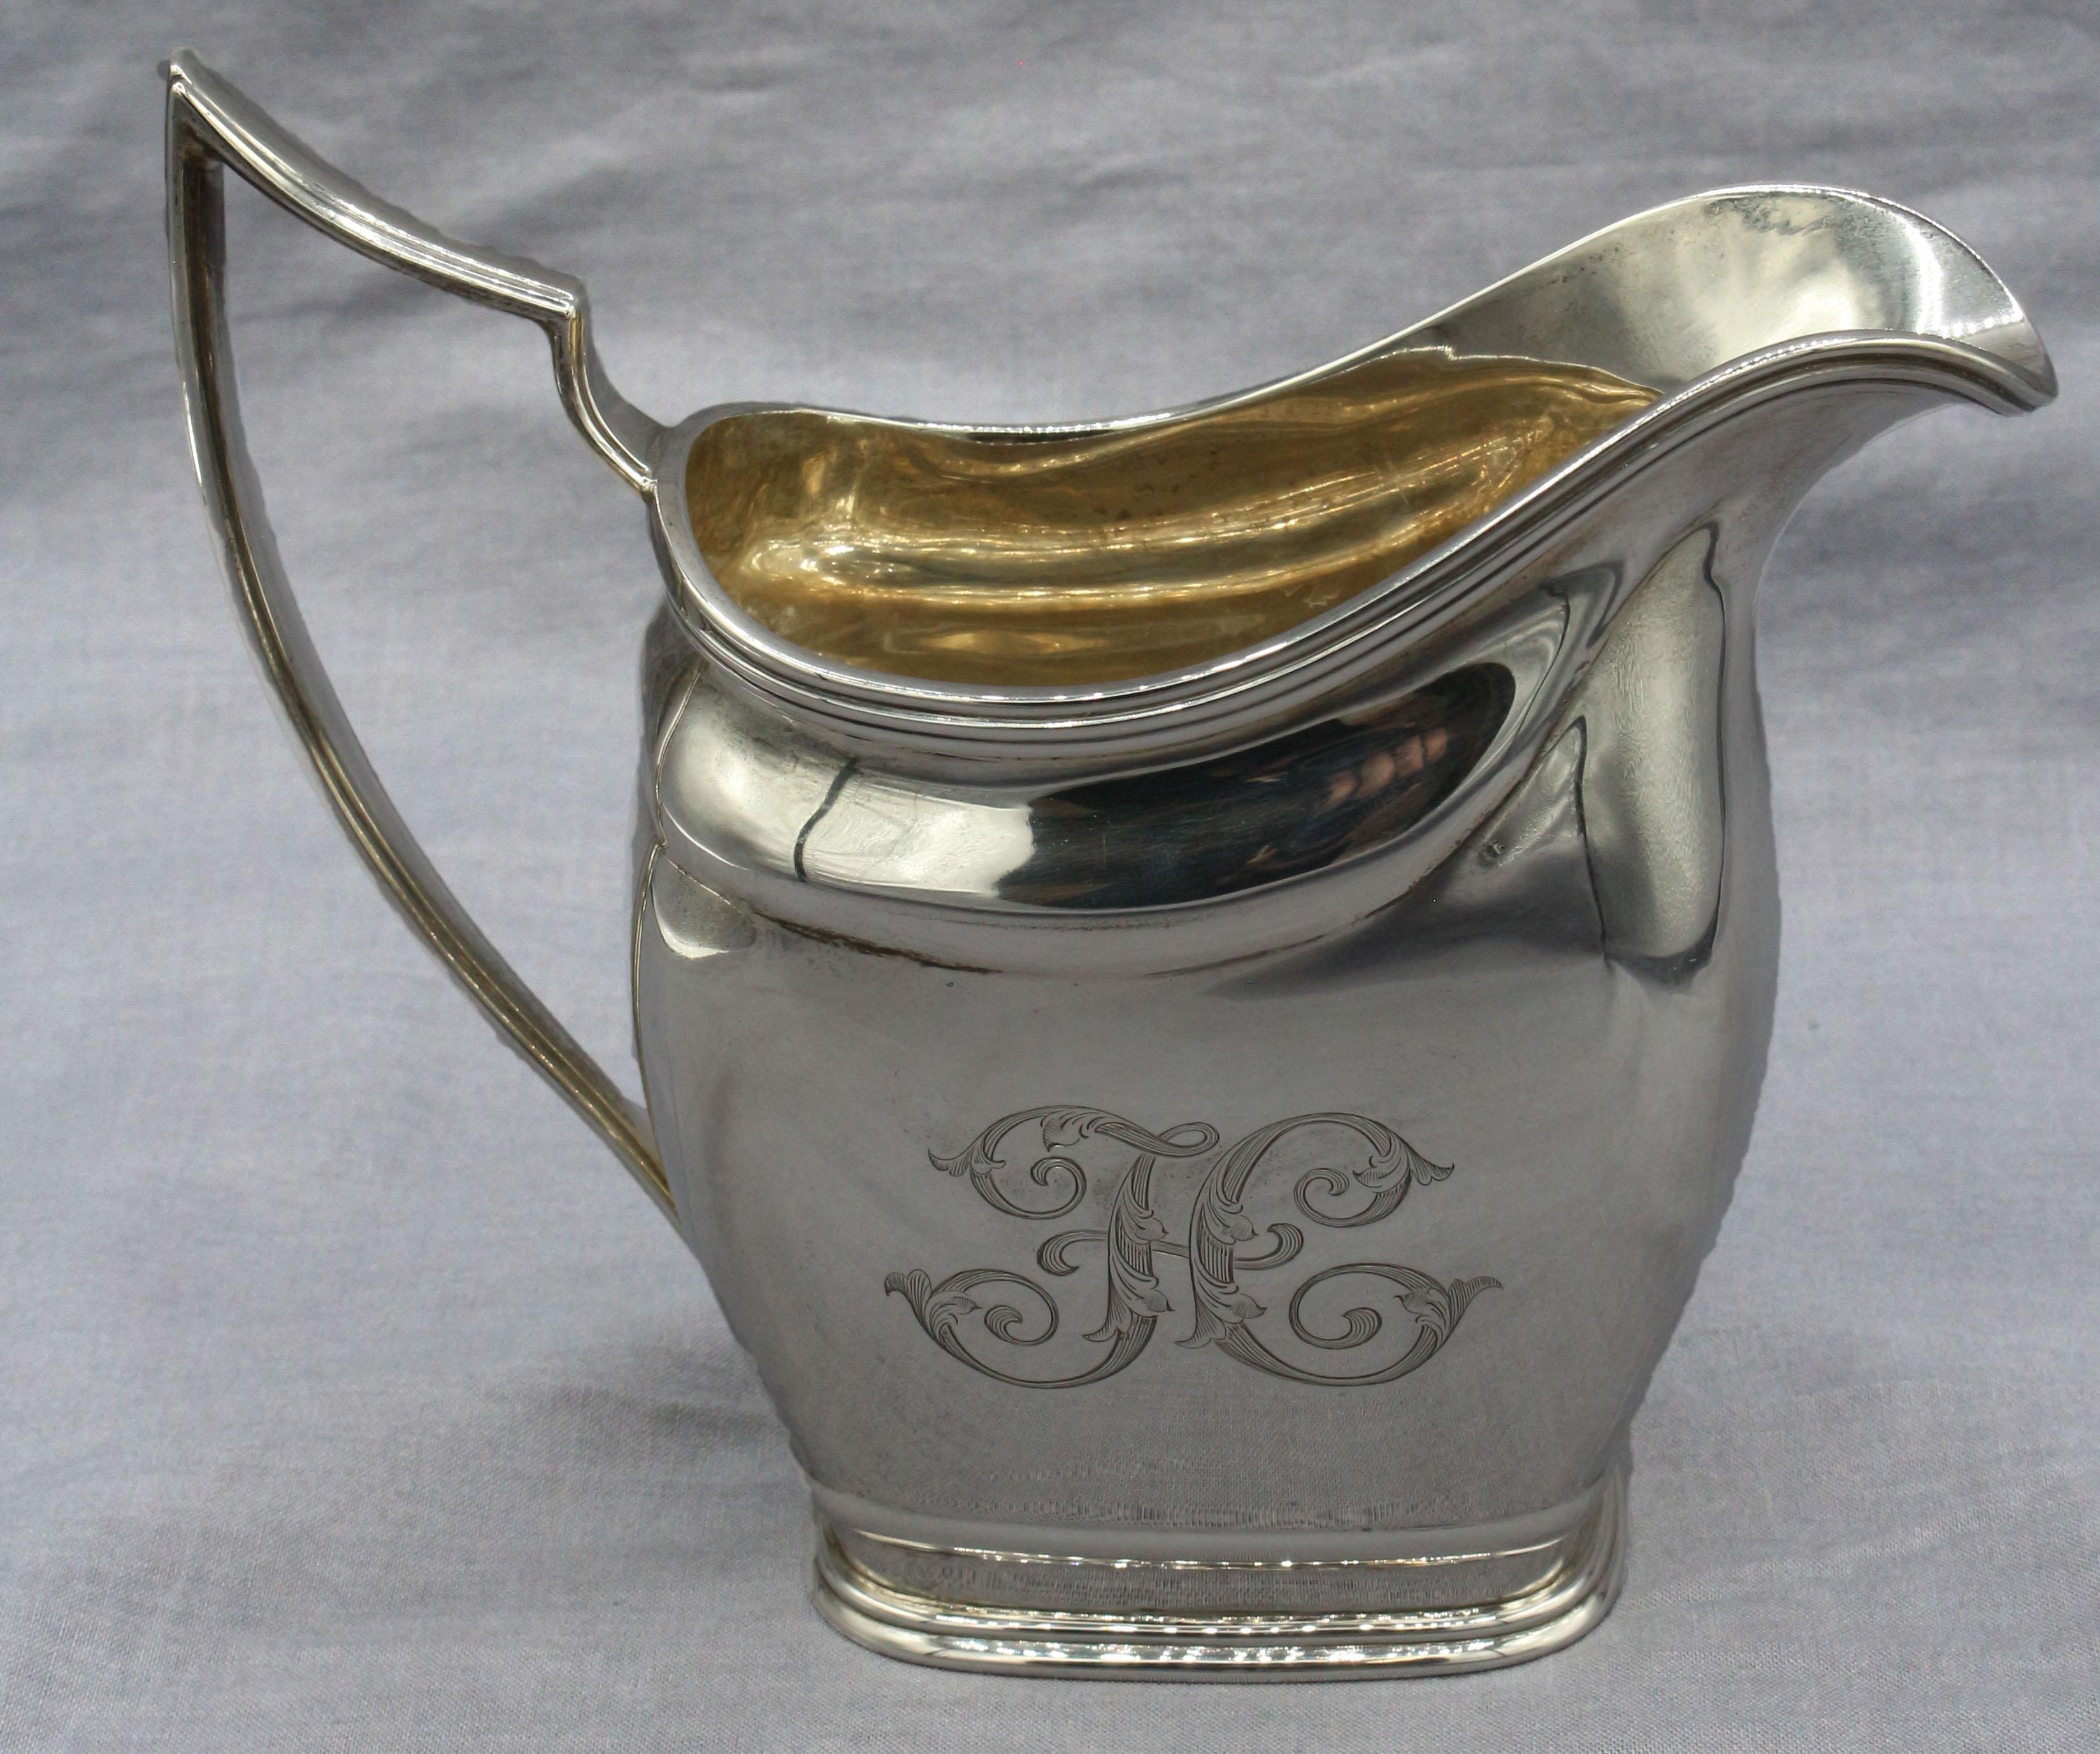 Sterling Silver 3-Piece Tea Set by Towle, circa 1900-30 4